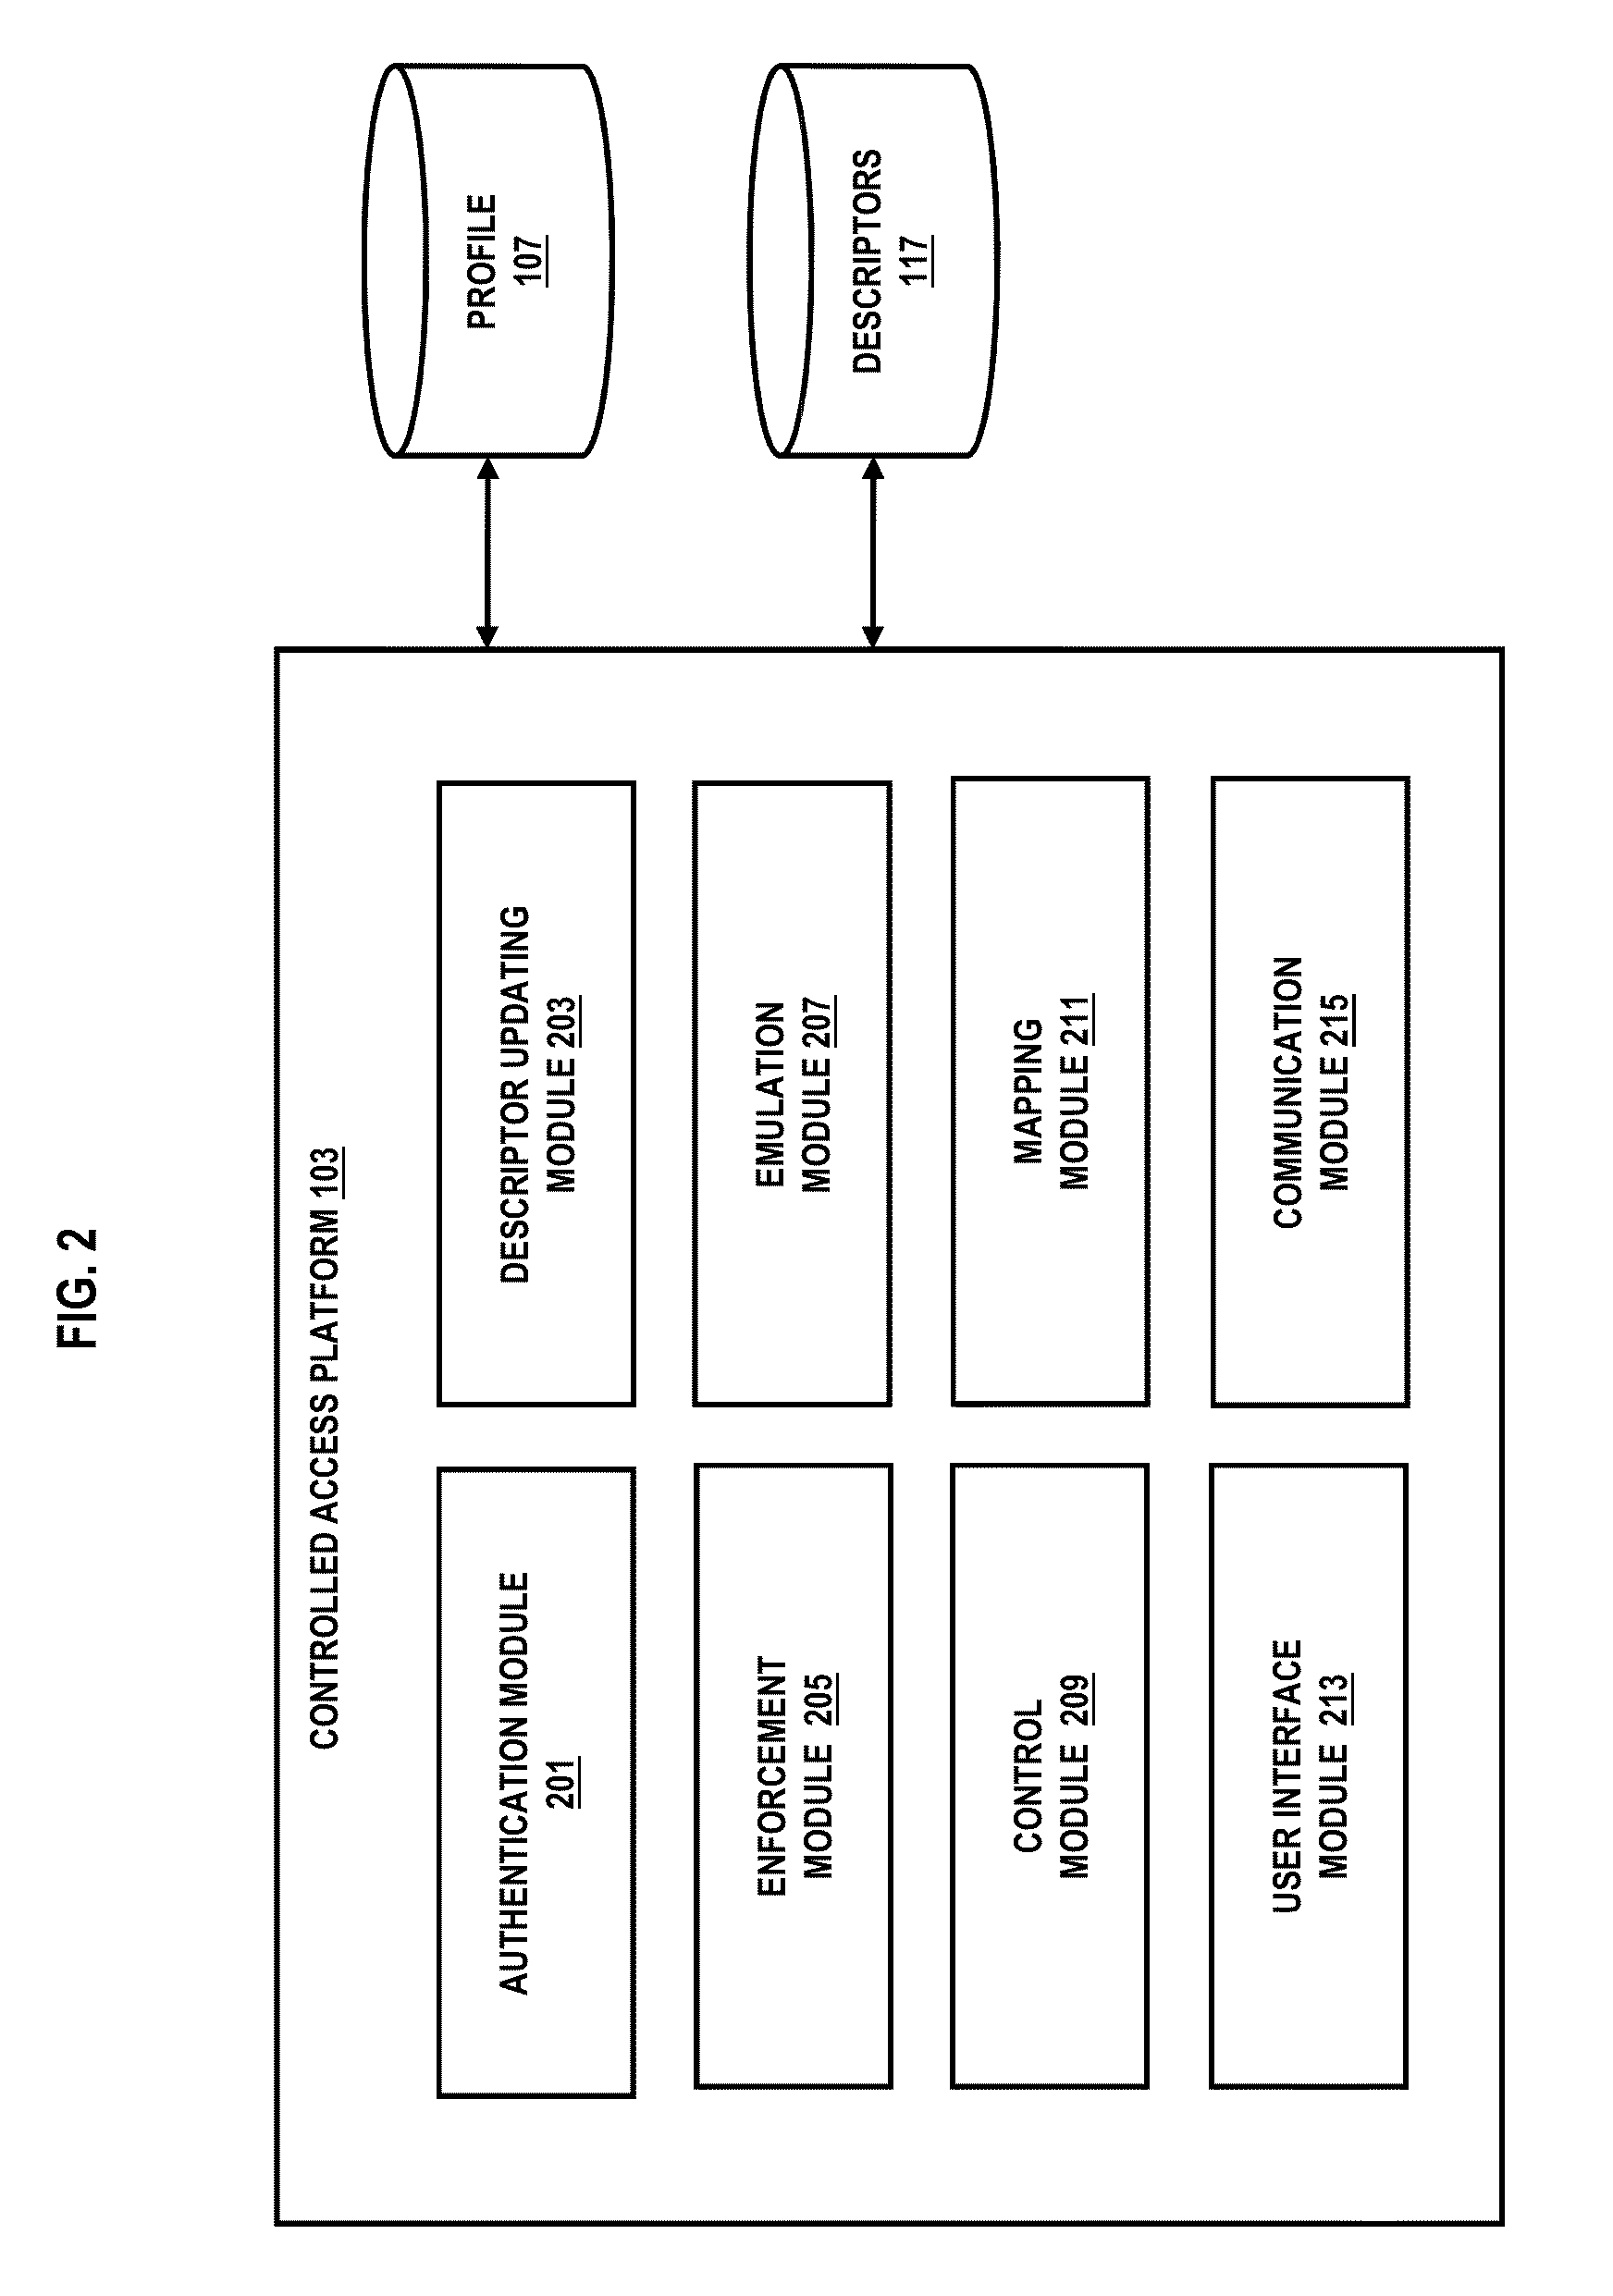 Method and system for facilitating controlled access to network services